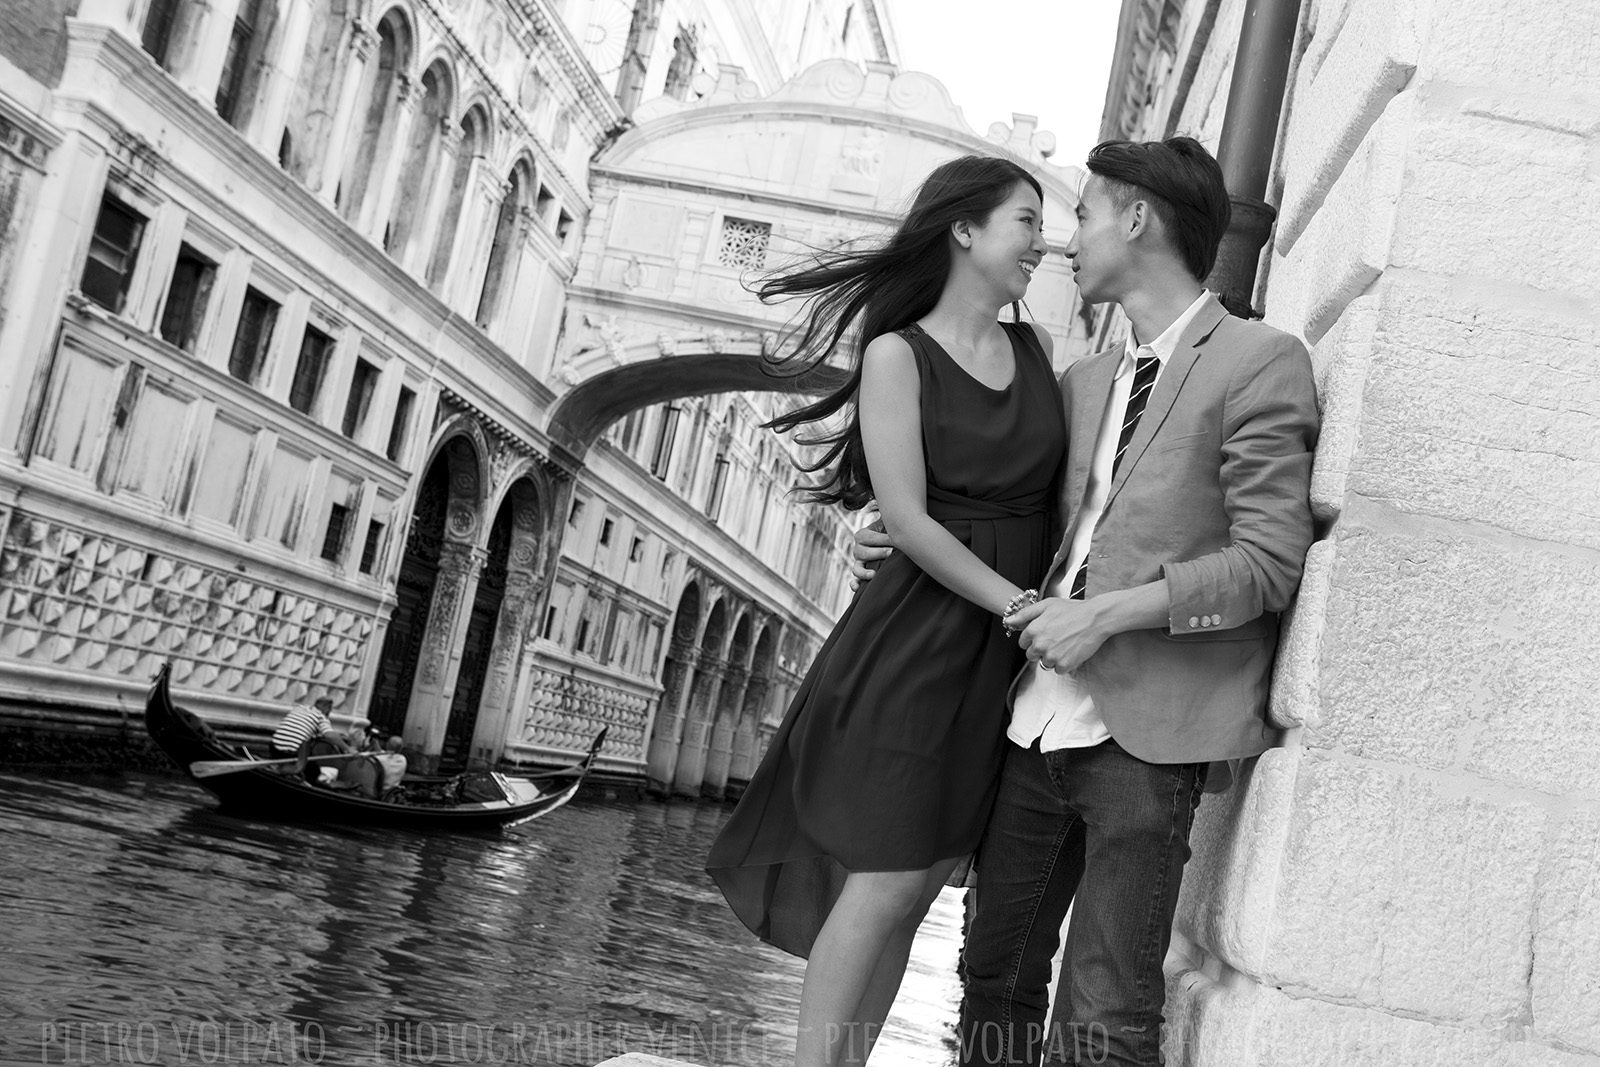 Venice photographer for portrait vacation photography session ~ Couple photographer in Venice ~ Romantic and fun photo walk